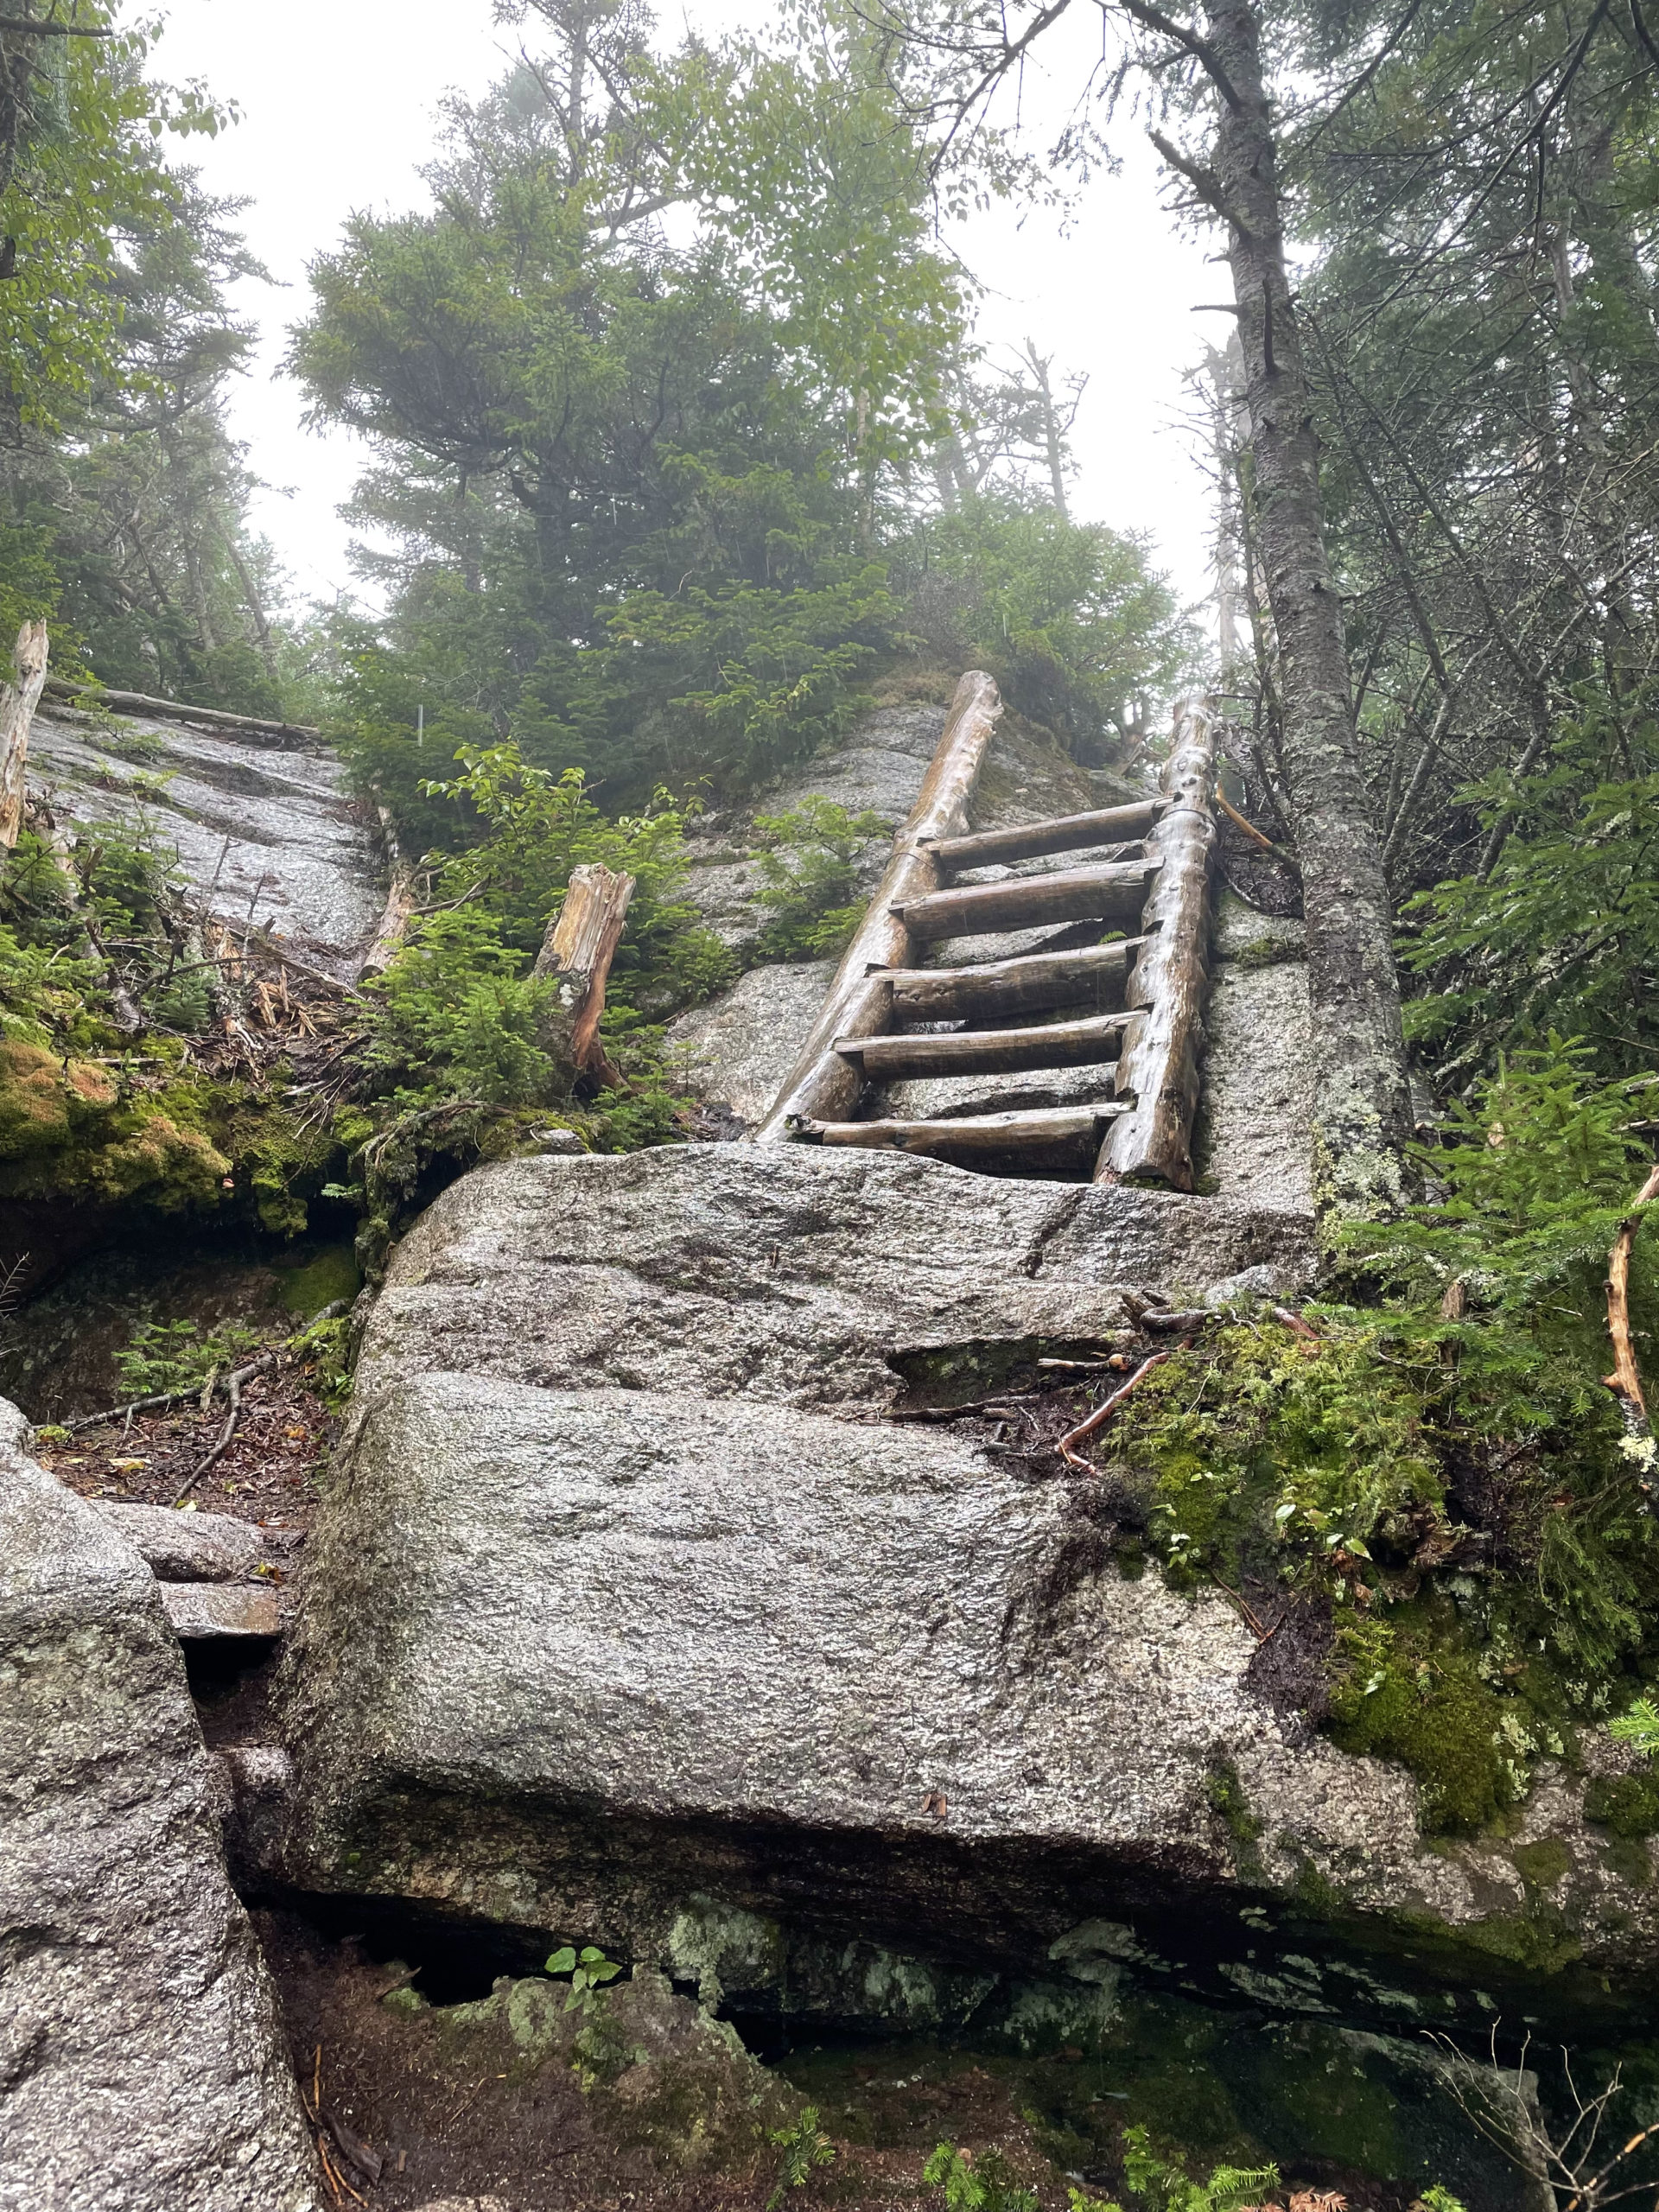 Log ladder, seen while hiking Mt. Hale and Mt. Zealand in the White Mountain National Forest, New Hampshire